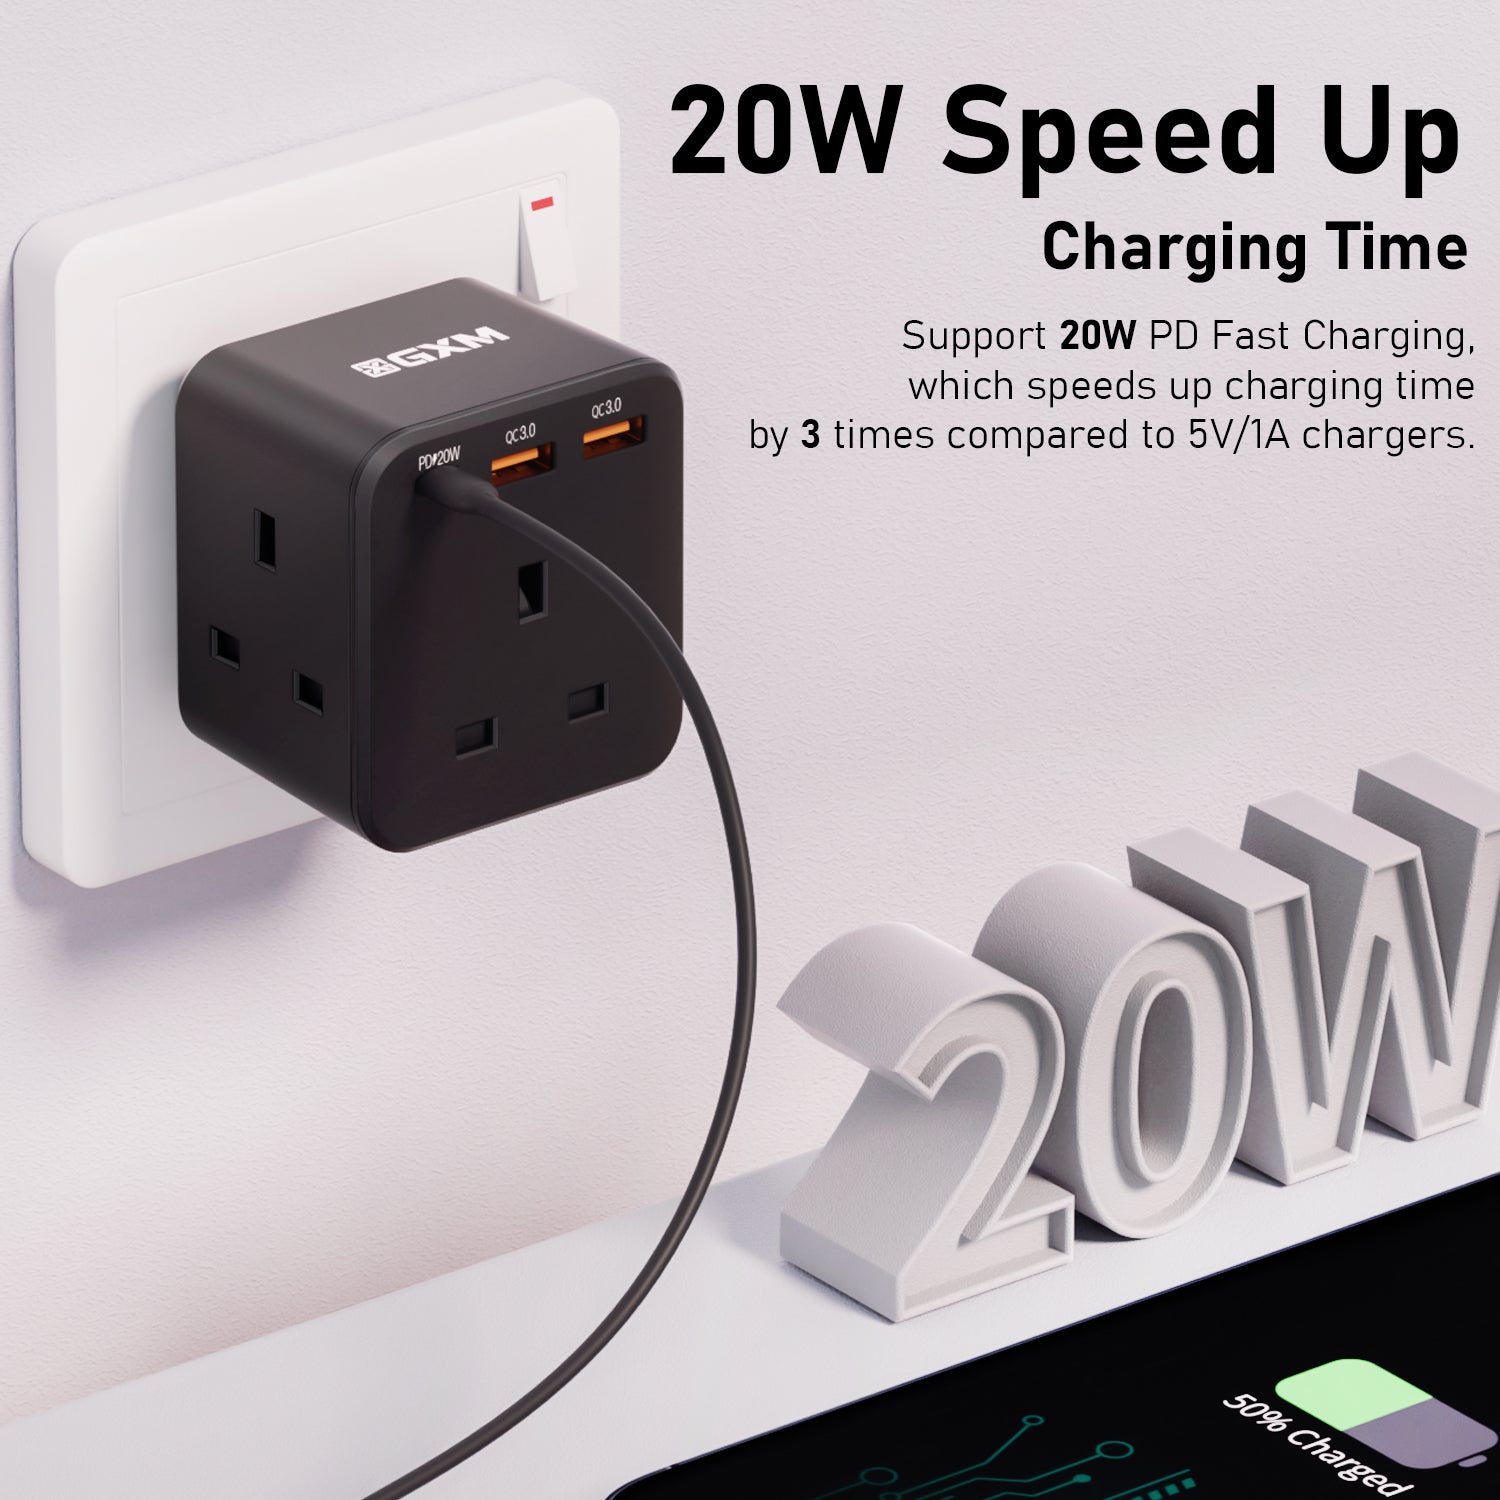 GXM 20W 13A 3-Way Multiway Adapter Wall Charger with 3 USB Ports Type-C USB For iPhone 14 13 12 Pro Max iPad Samsung MA-3W3U Safety Mark